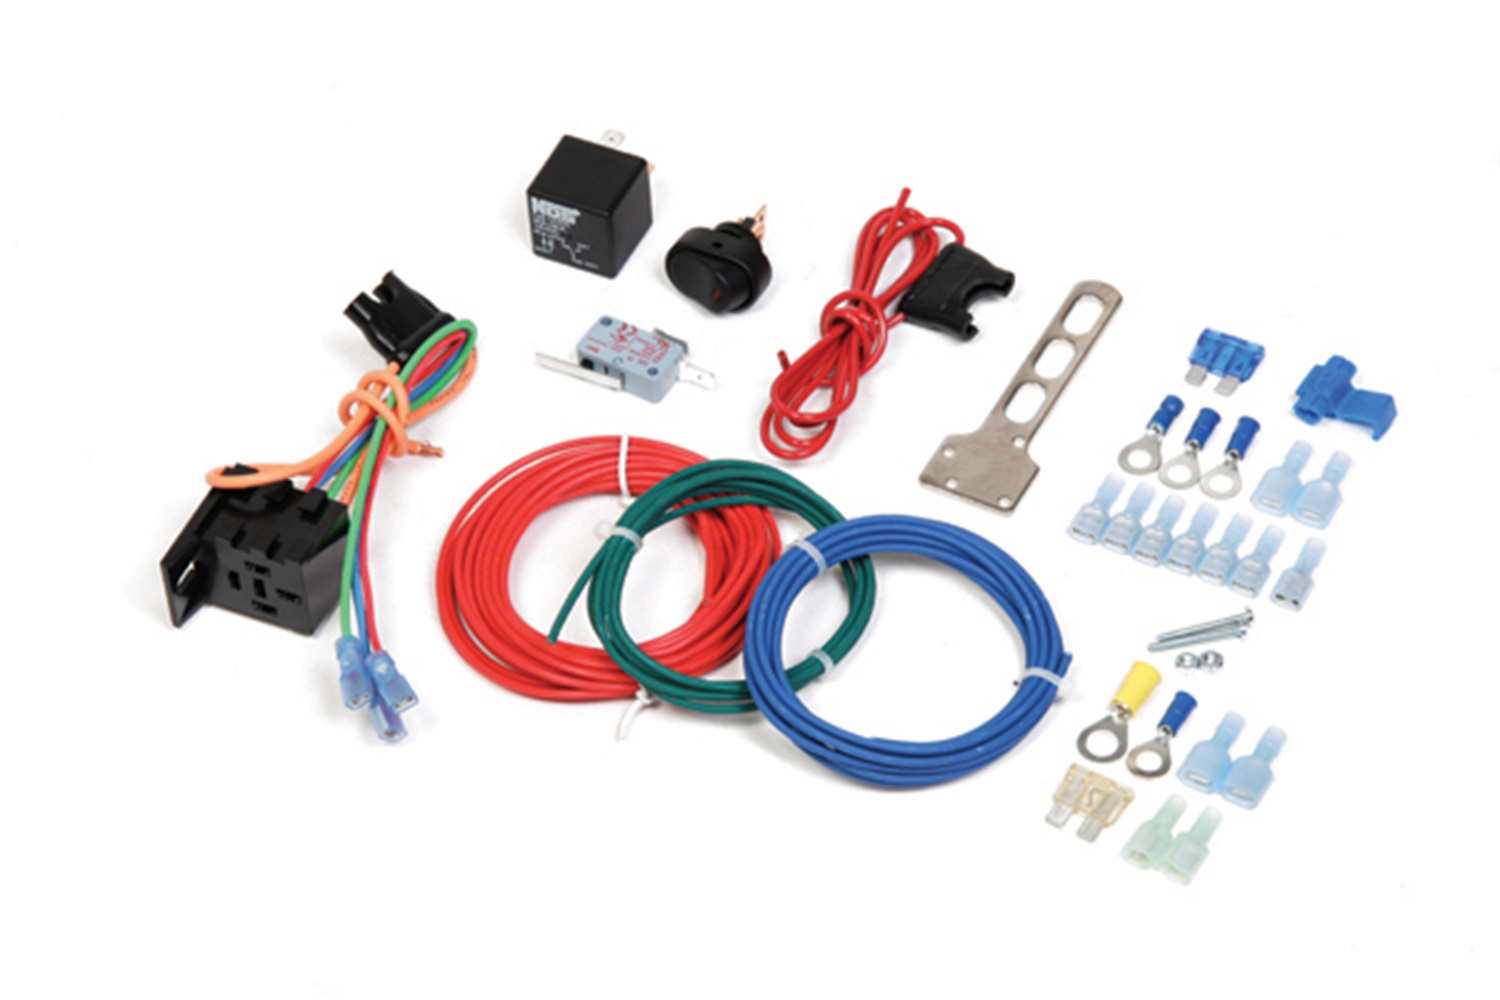 NOS Single Stage Electrical Pack Kit, everything you need to properly wire an NOS nitrous kit